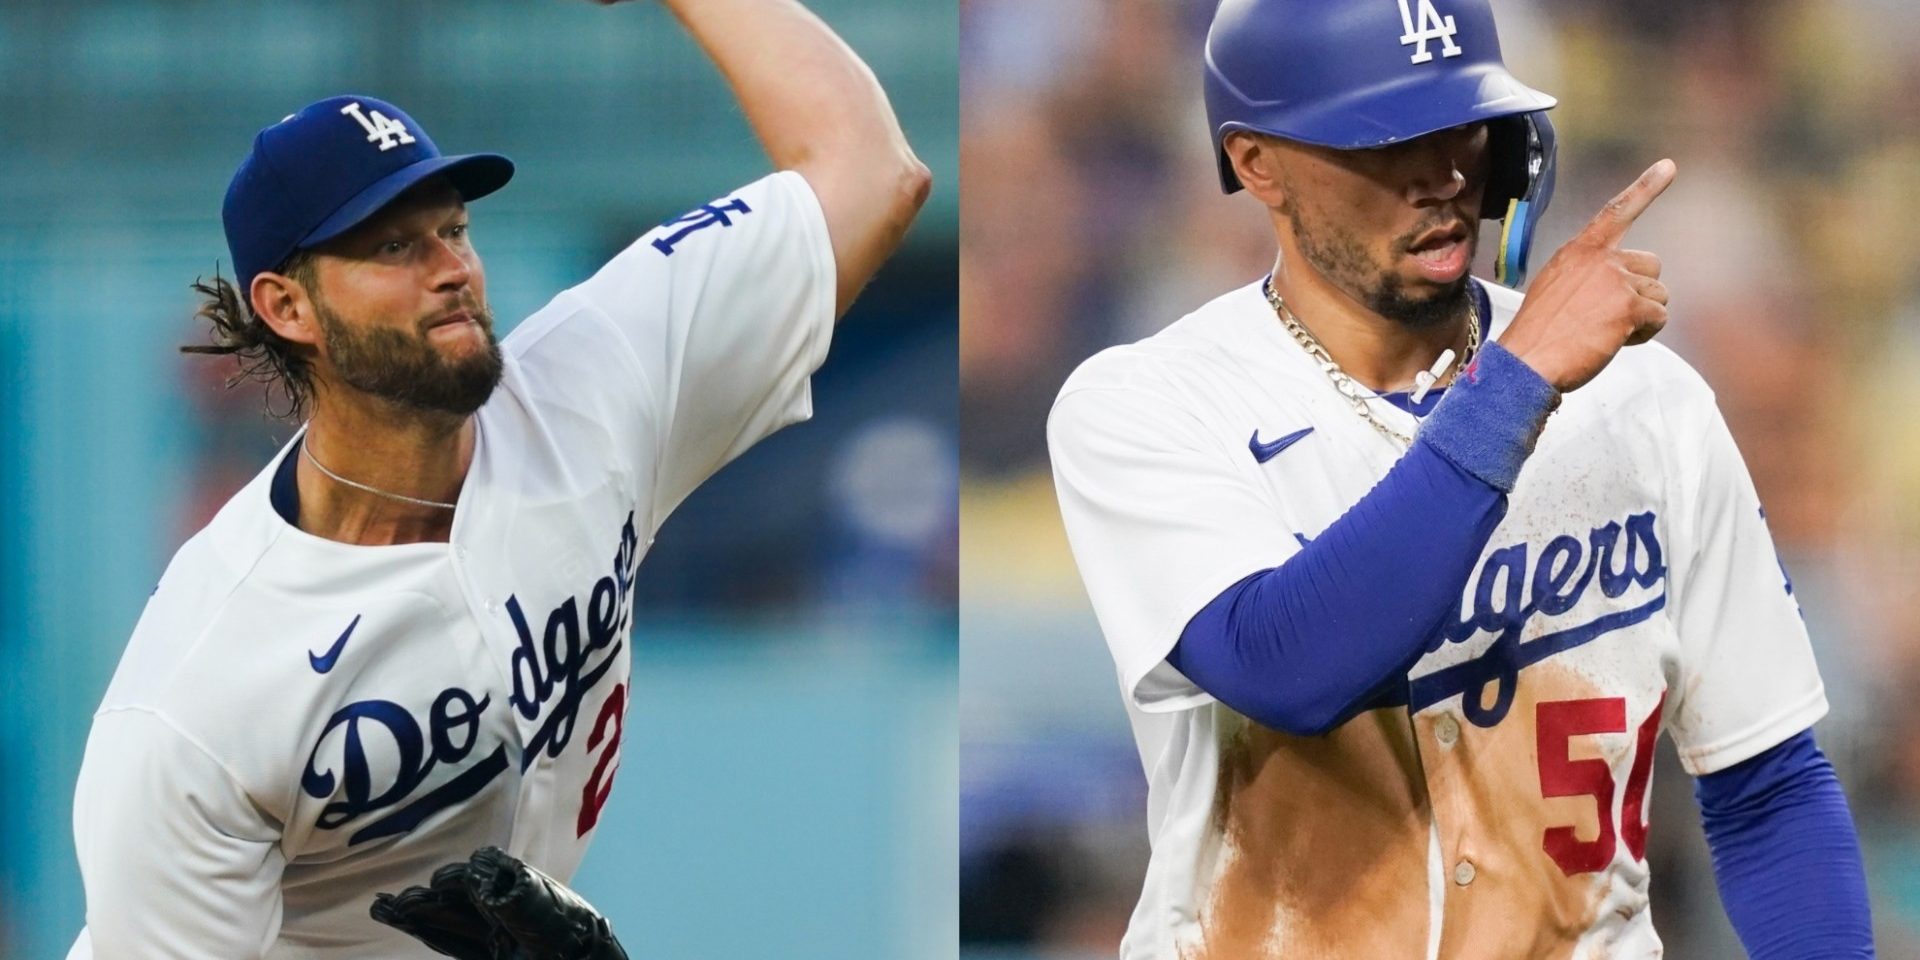 Dodgers still hot: Kershaw &amp; Betts enter record books in 9-1 win over D-backs